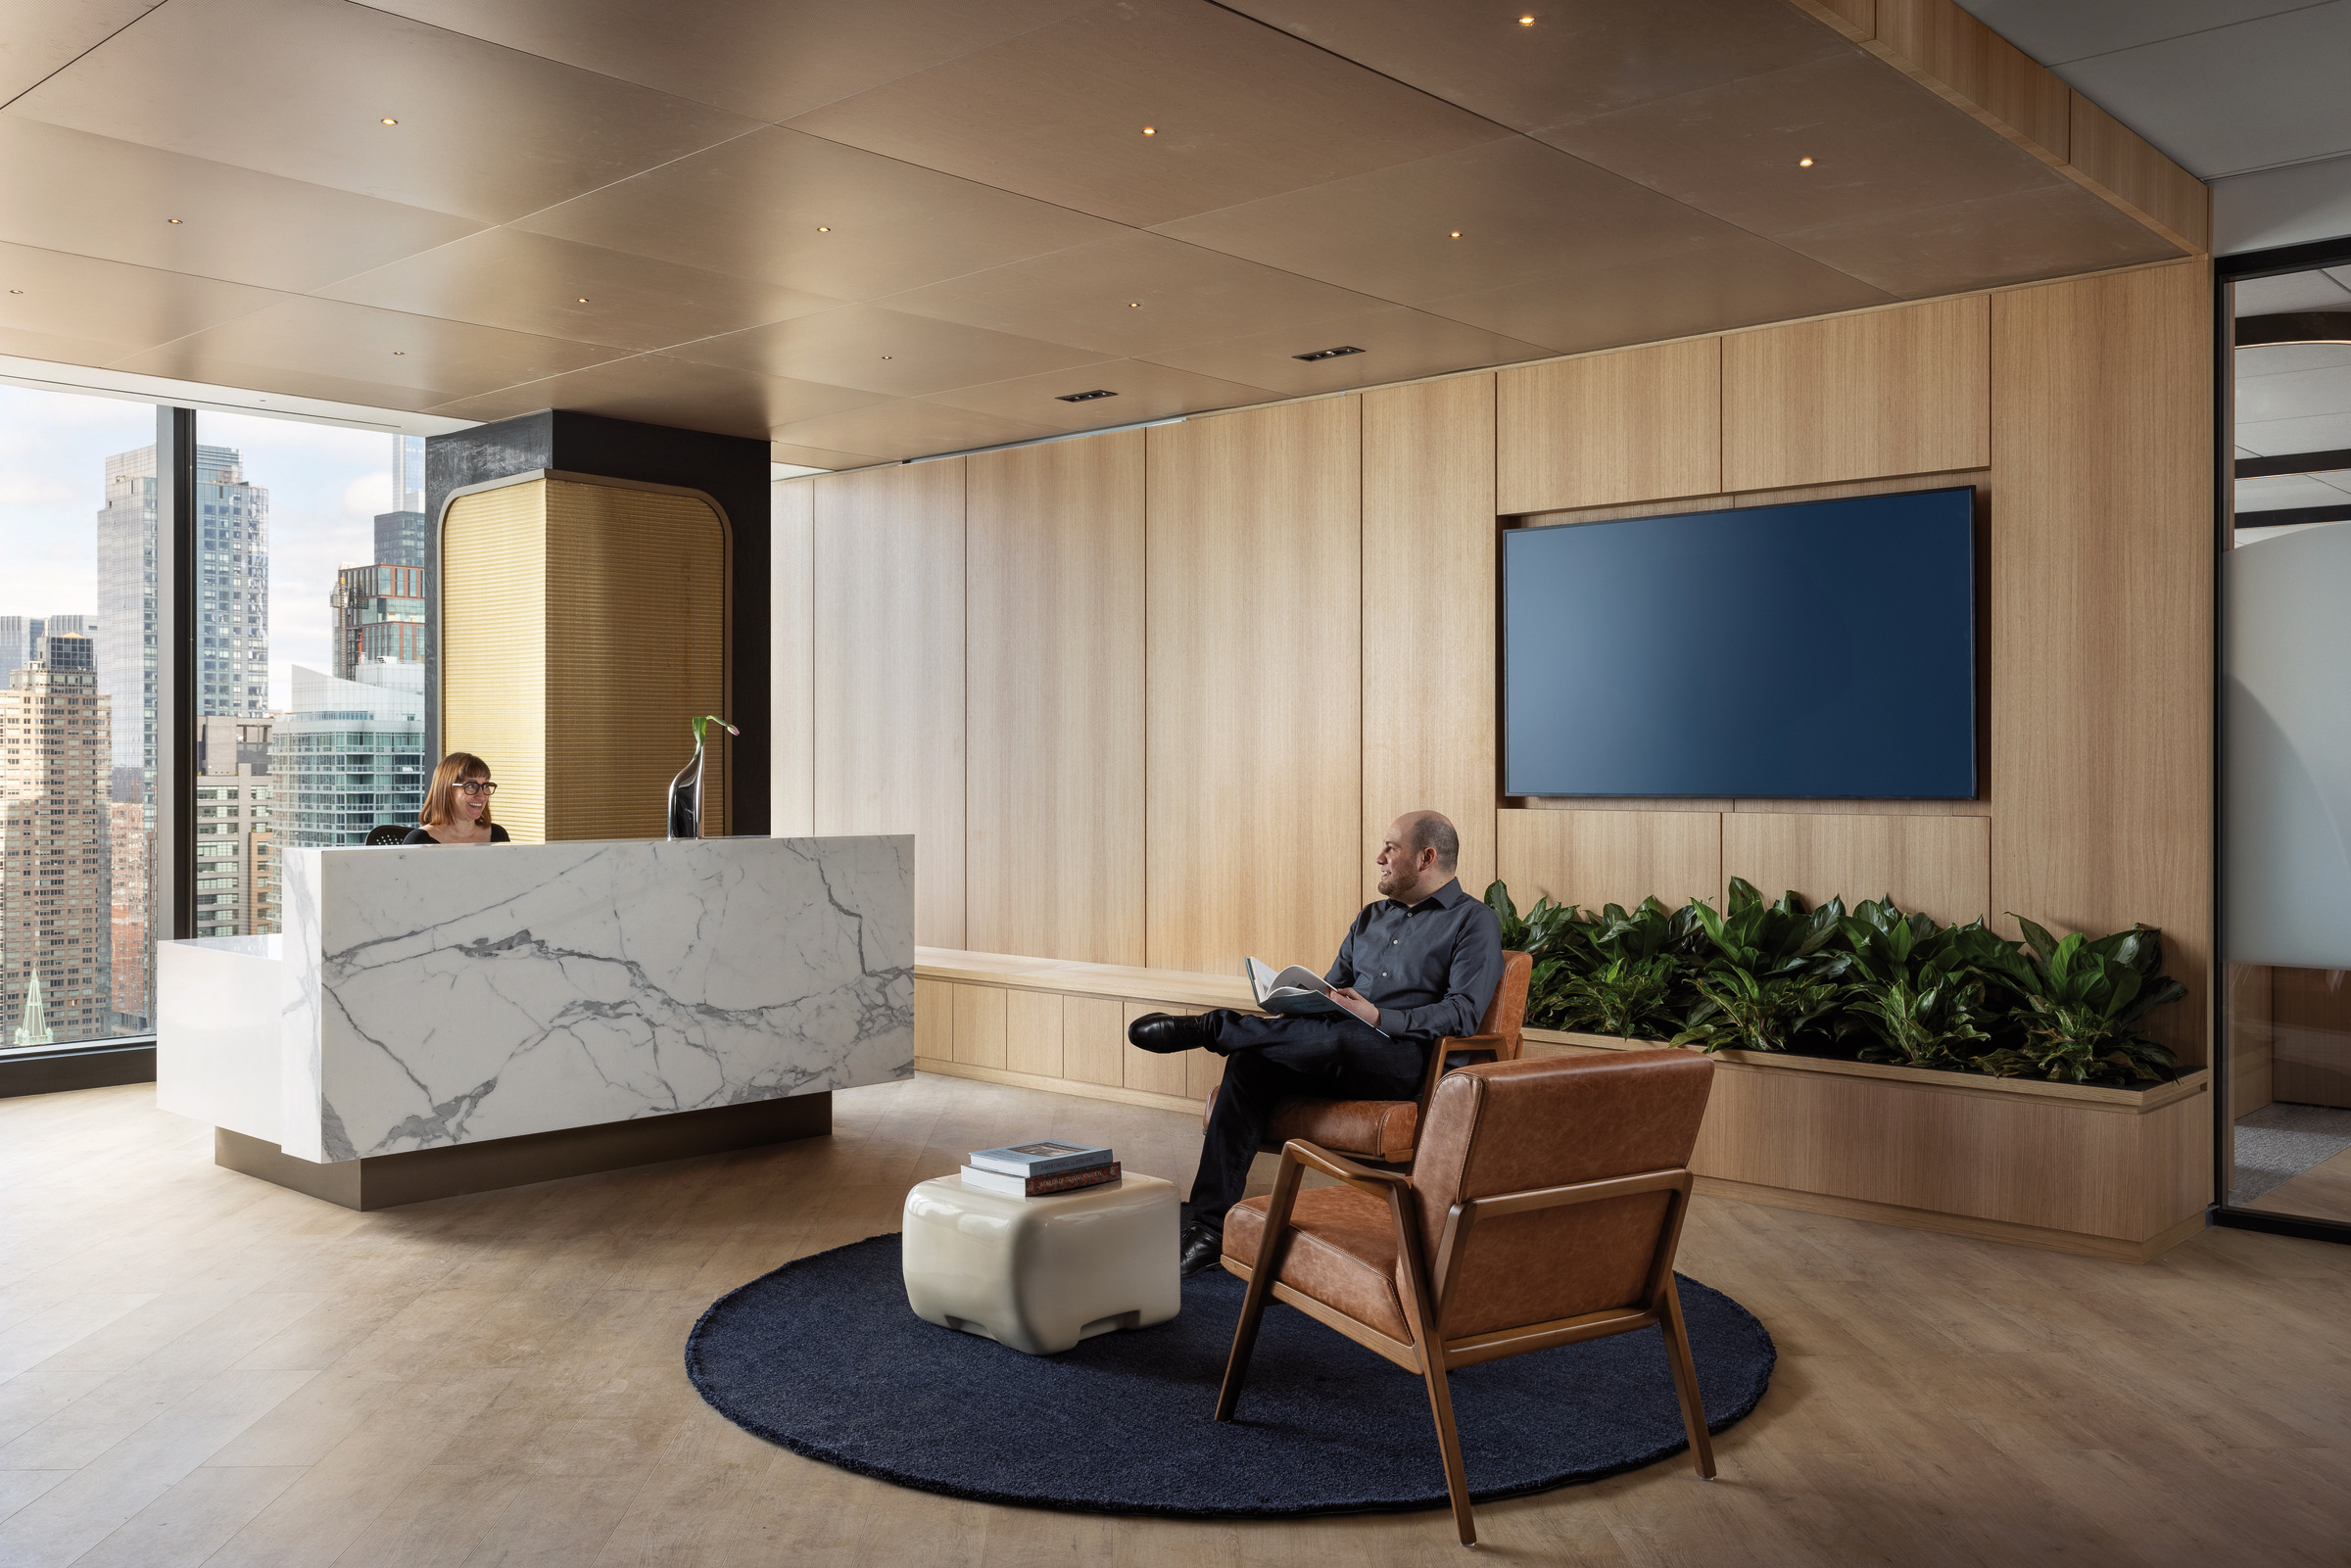 Minimalist office lobby featuring a sleek white marble reception desk, warm wooden wall panels, and a cozy seating area with a leather armchair, complemented by natural greenery and expansive city views through floor-to-ceiling windows.